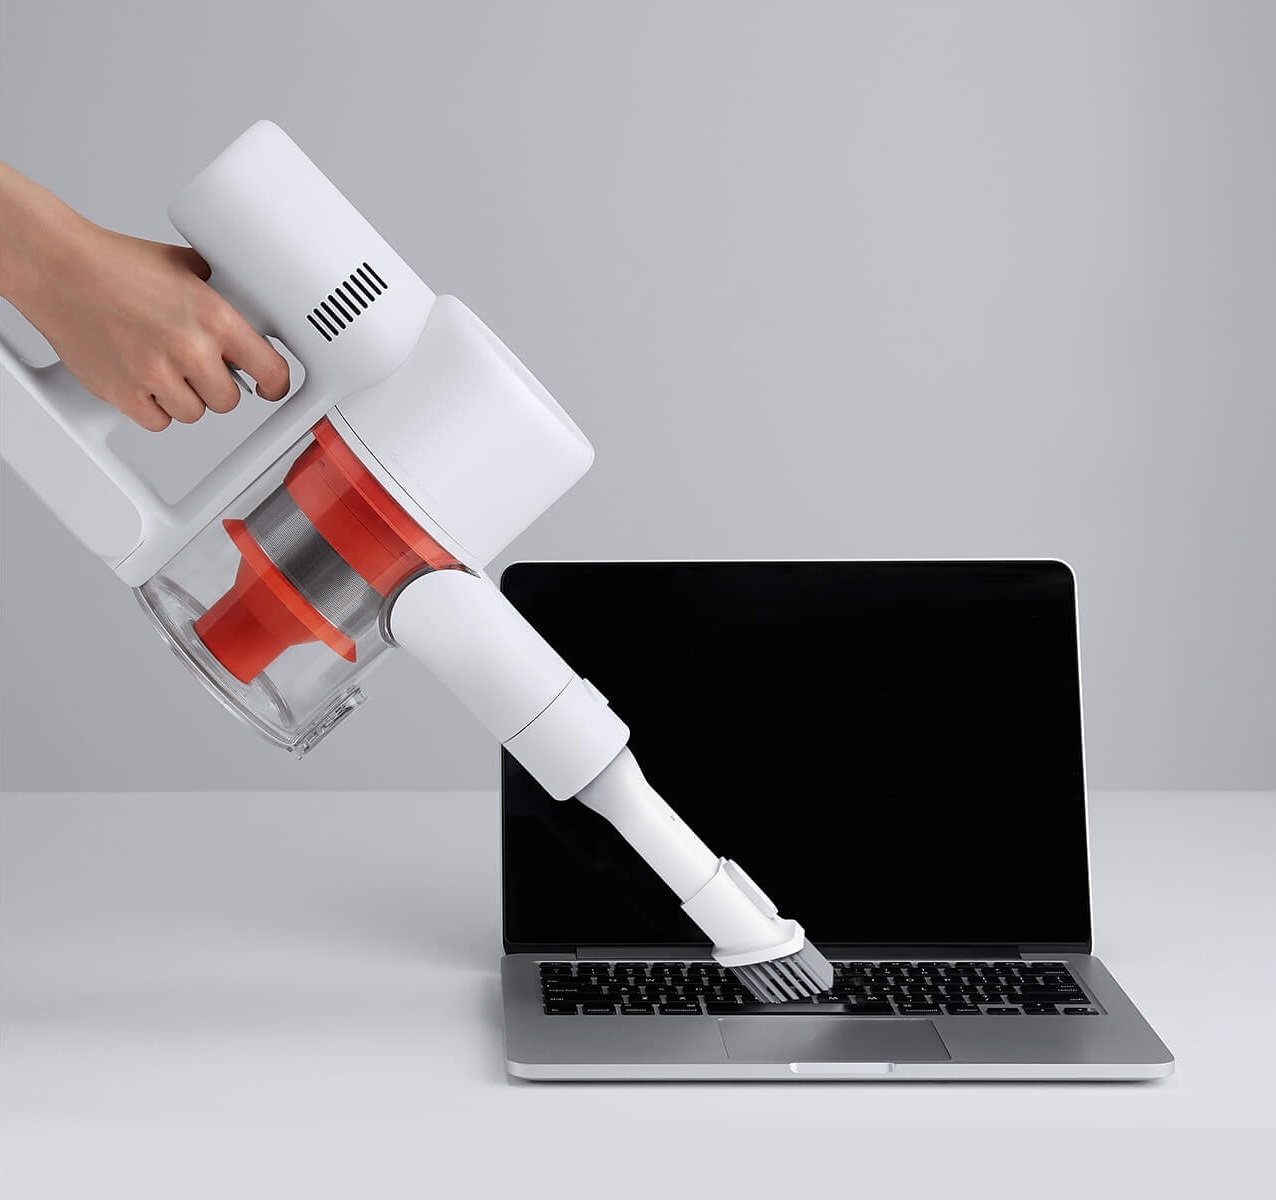 Xiaomi Mi G9 handheld vacuum cleaner: The Chinese can clean too